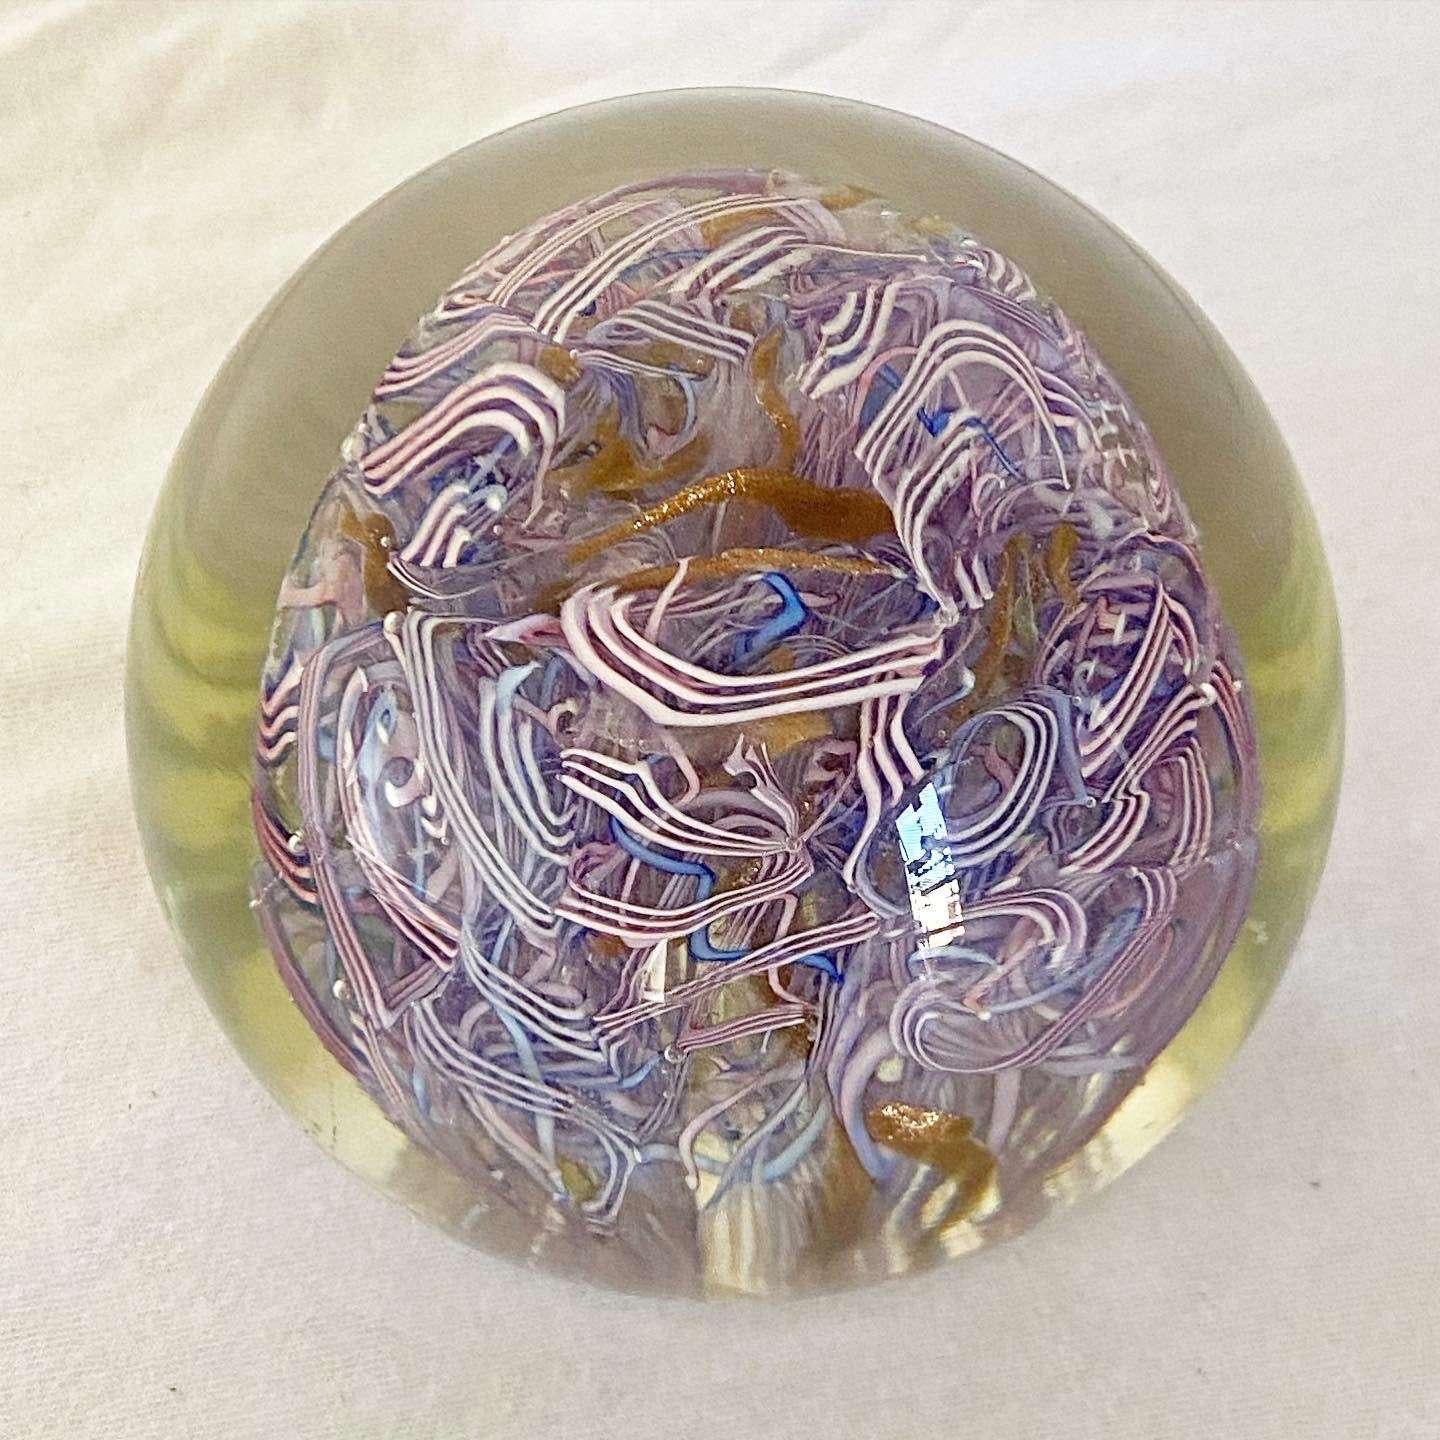 Exceptional vintage hand blown paperweight. Features a swirled purple and pink interior.

